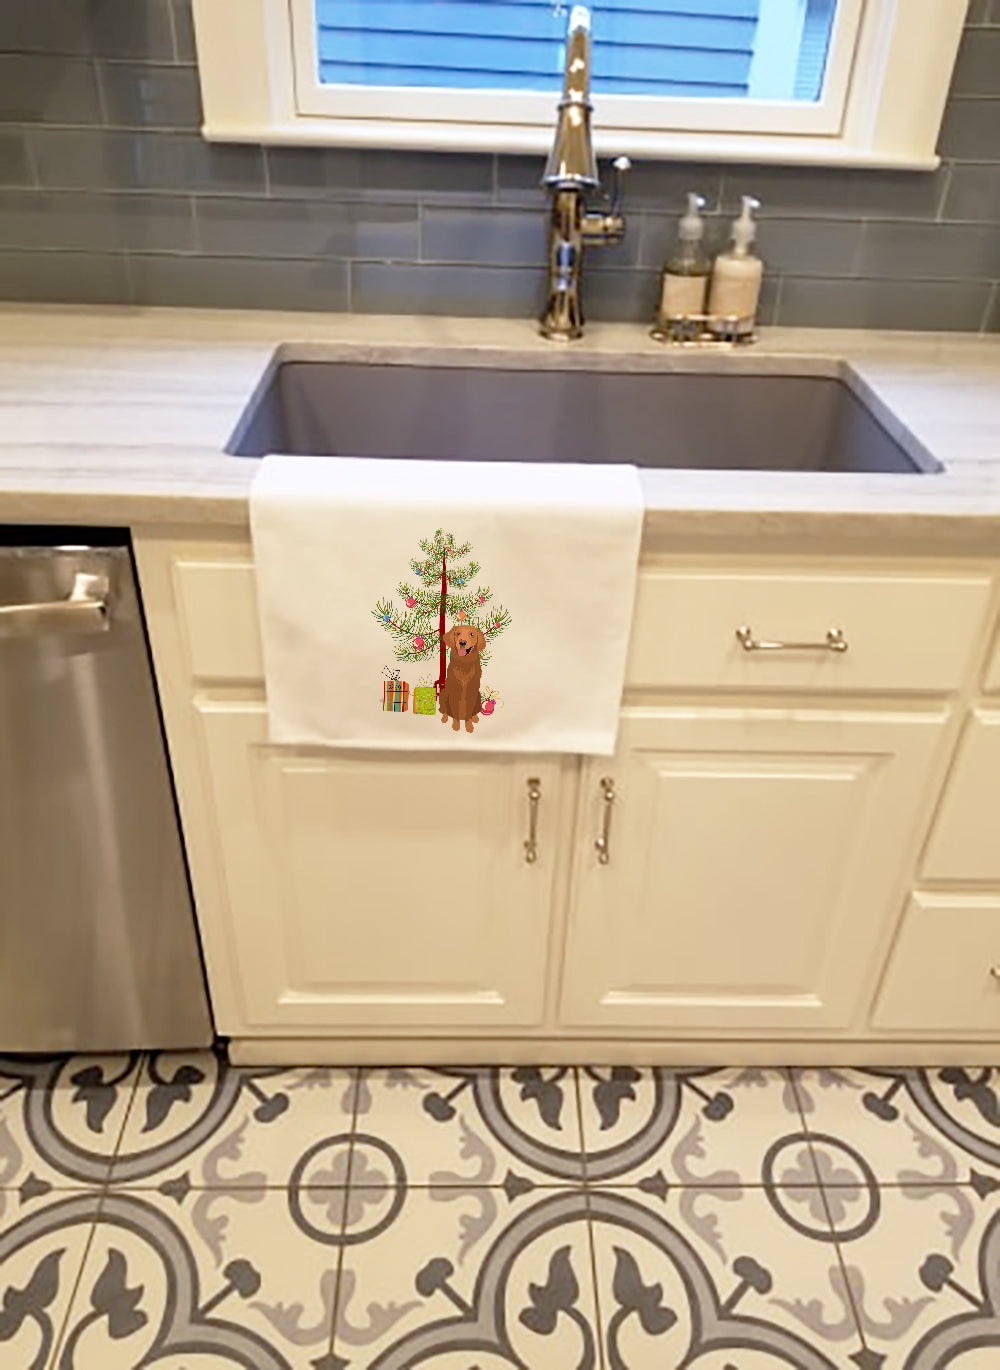 Buy this Golden Retriever Red #1 Christmas White Kitchen Towel Set of 2